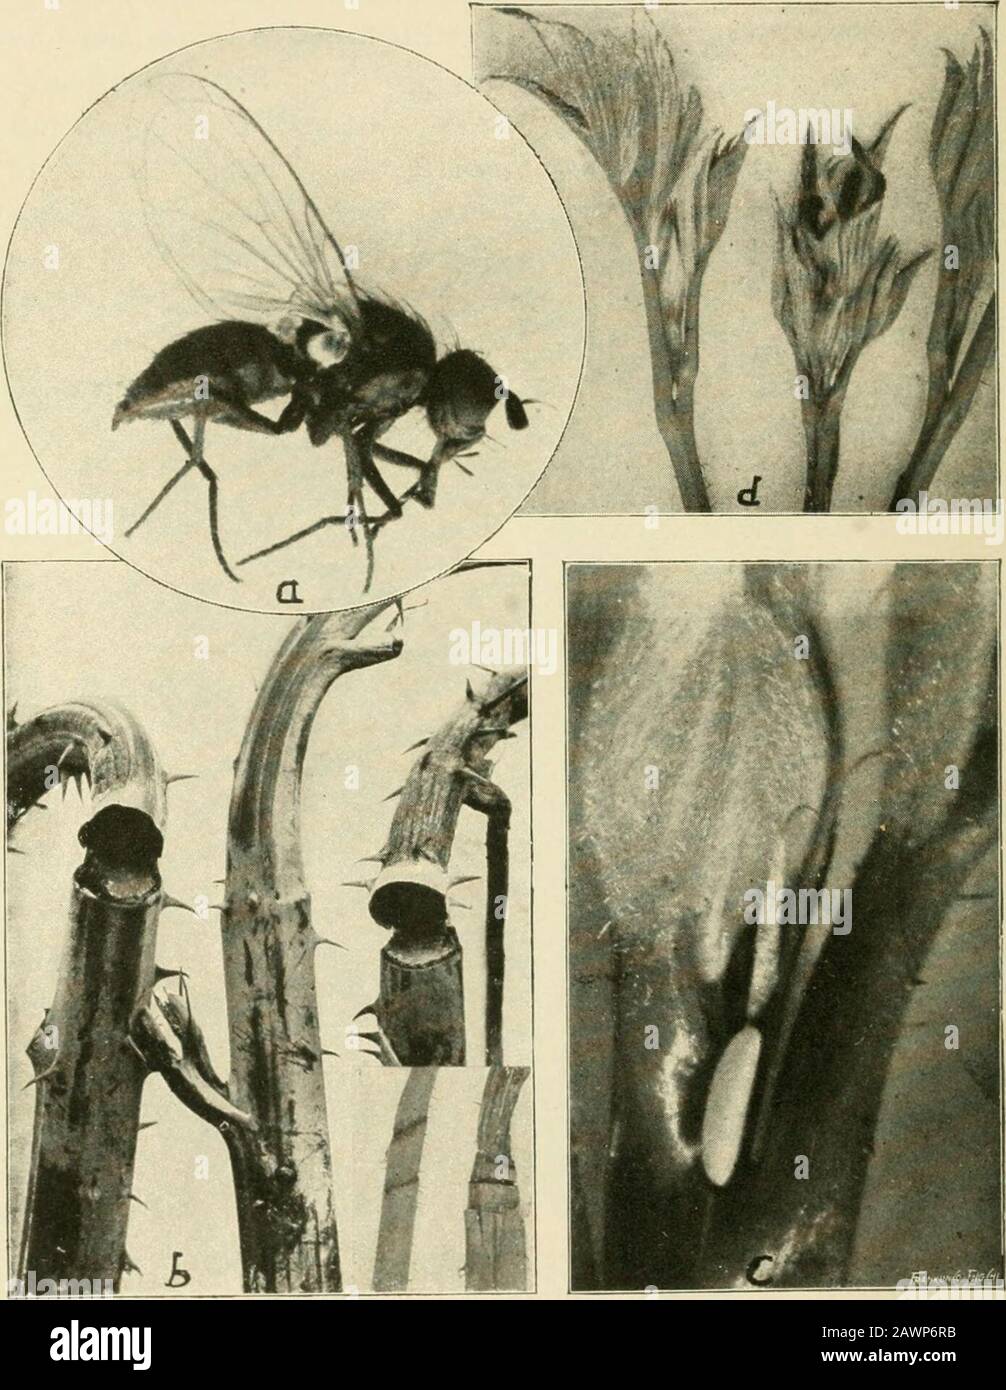 Insect pests of farm, garden and orchard . ^ has been observed in New York, Canada, Michigan,Pennsylvania, and recently it has become a serious pest in Wash-ington, so that it is undoubtedly much more widely distributedthan the records indicate. The parent fly, shown in Fig. 338,is grayish black, much resembling the house-fly, but slightlysmaller. Life History.—The flies appear in April and deposit their eggsas soon as the shoots are well above ground, continuing until early * Phorbia rubivora Coquillet. Family Anthomyidce. See Slingerland,Rulletin 126, Cornell Univ. Agr. Exp. Sta., p. 54; W. Stock Photo